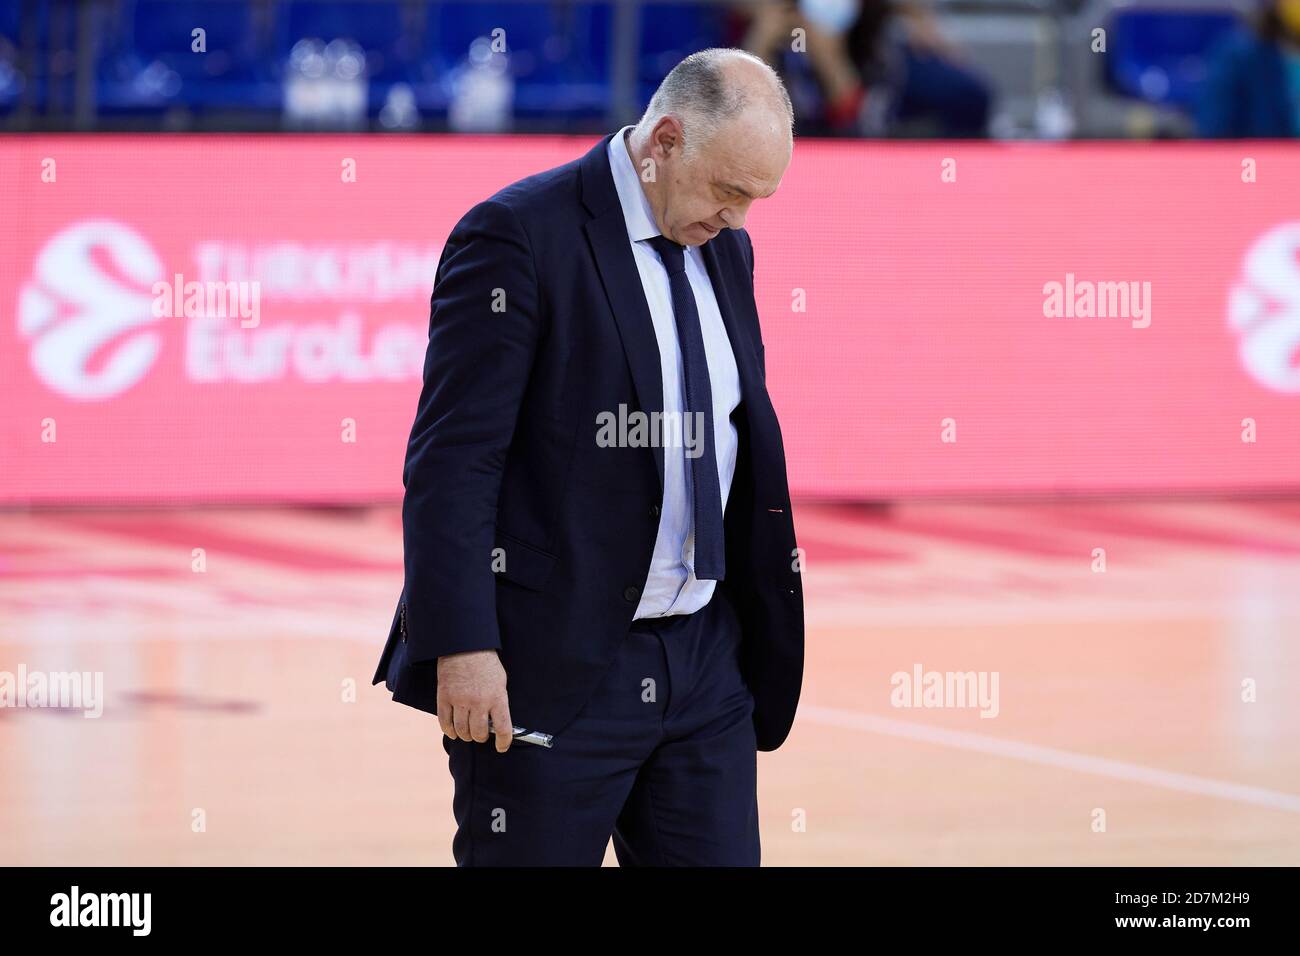 Barcelona, Spain. 23rd Oct 2020. Pablo Laso of Real Madrid during the Turkish Airlines EuroLeague match between FC Barcelona and Real Madrid at Palau Blaugrana on October 23, 2020 in Barcelona, Spain. Credit: Dax Images/Alamy Live News Stock Photo